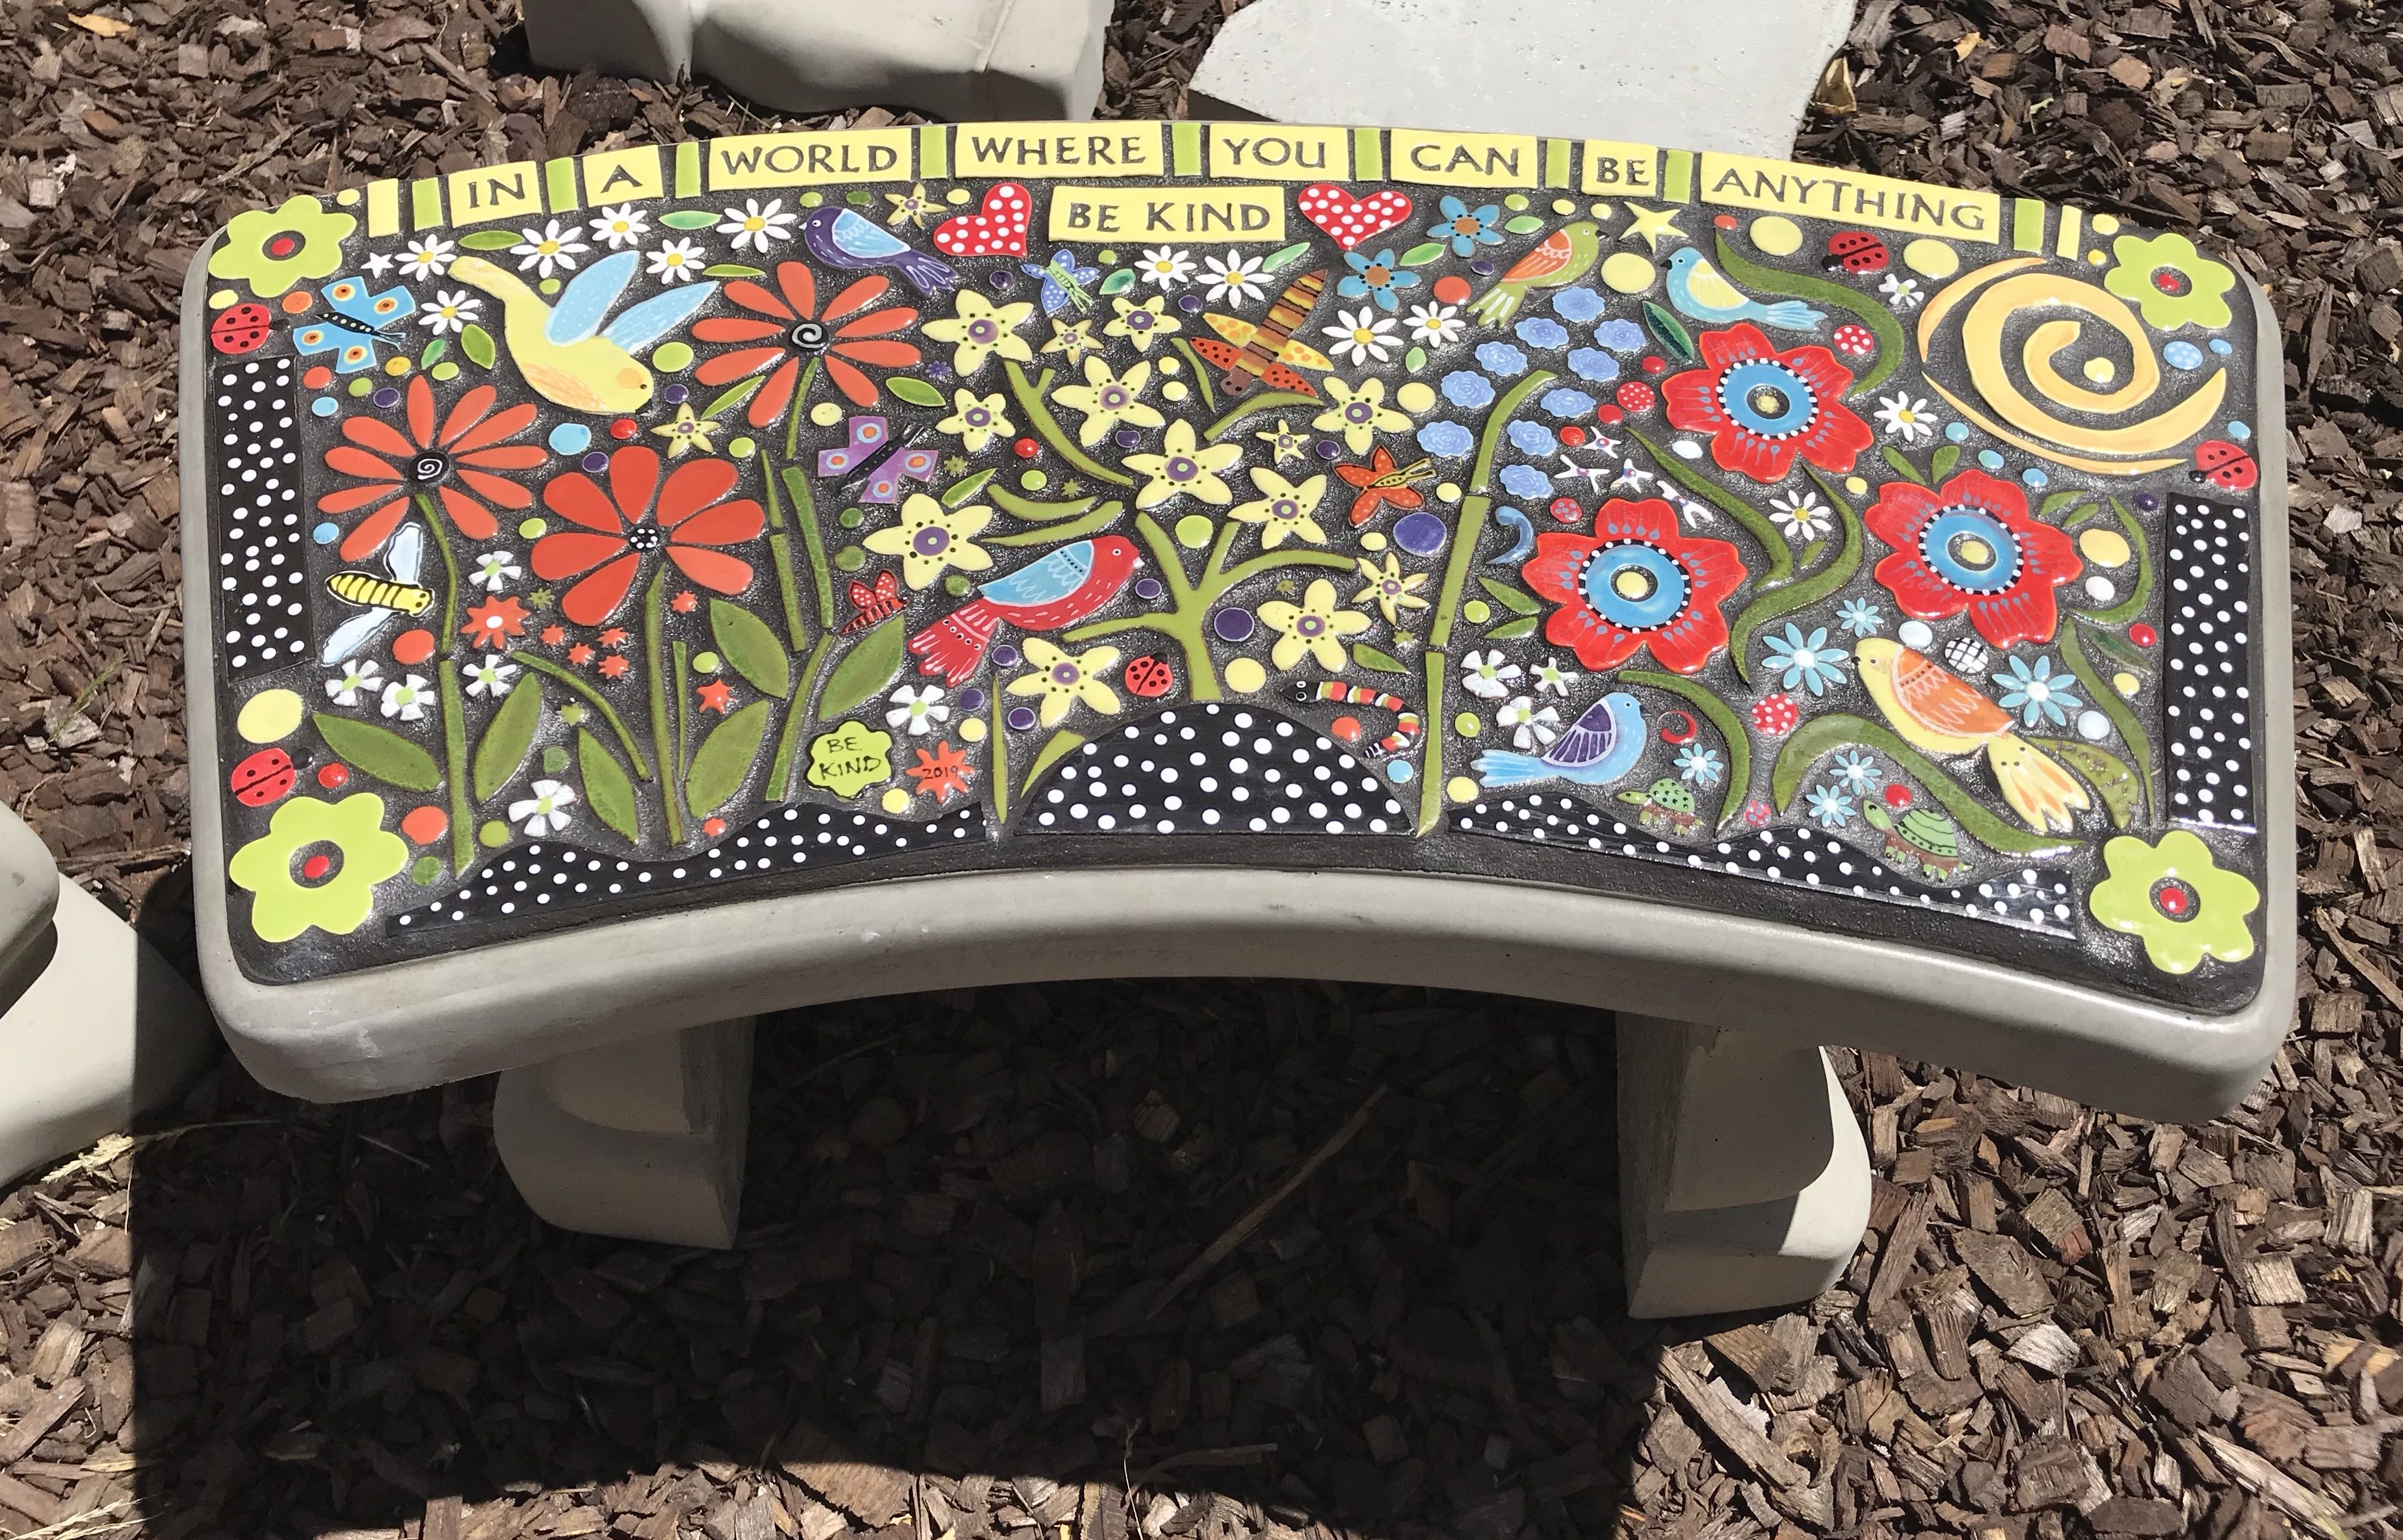 Stained Glass Mosaic Cement Garden Bench